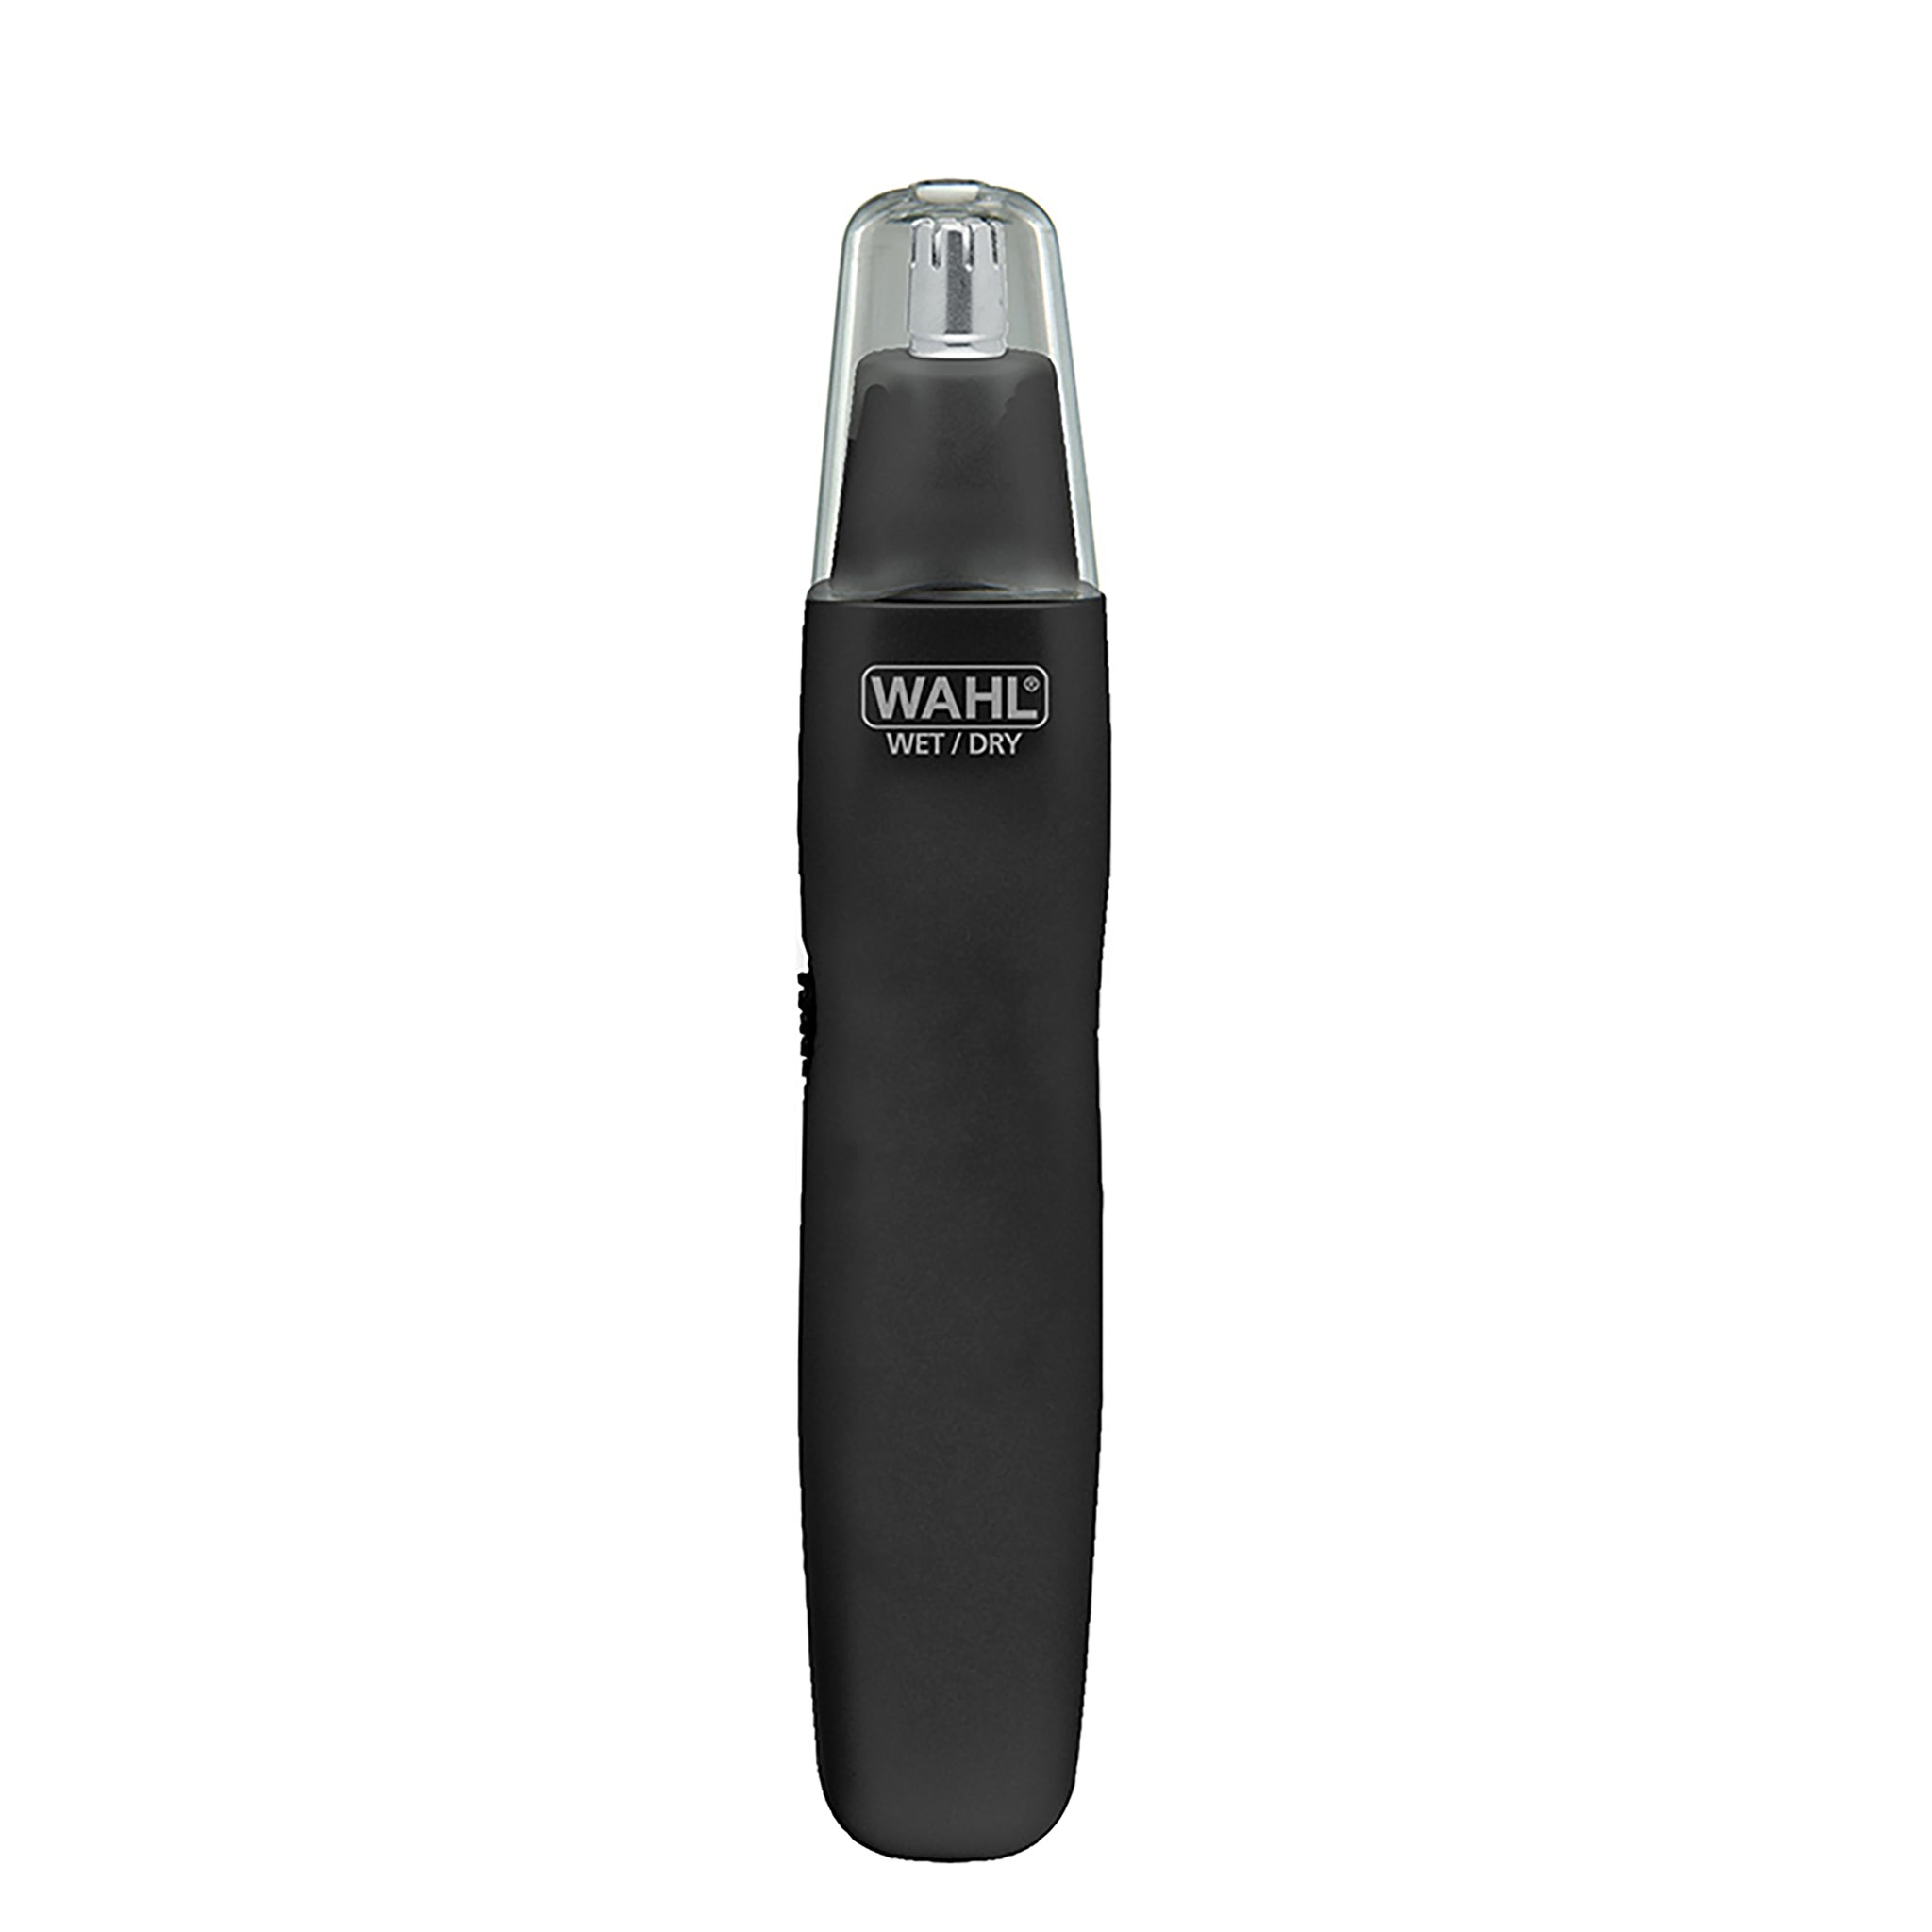 EAR, NOSE, BROW WET/DRY TRIMMER